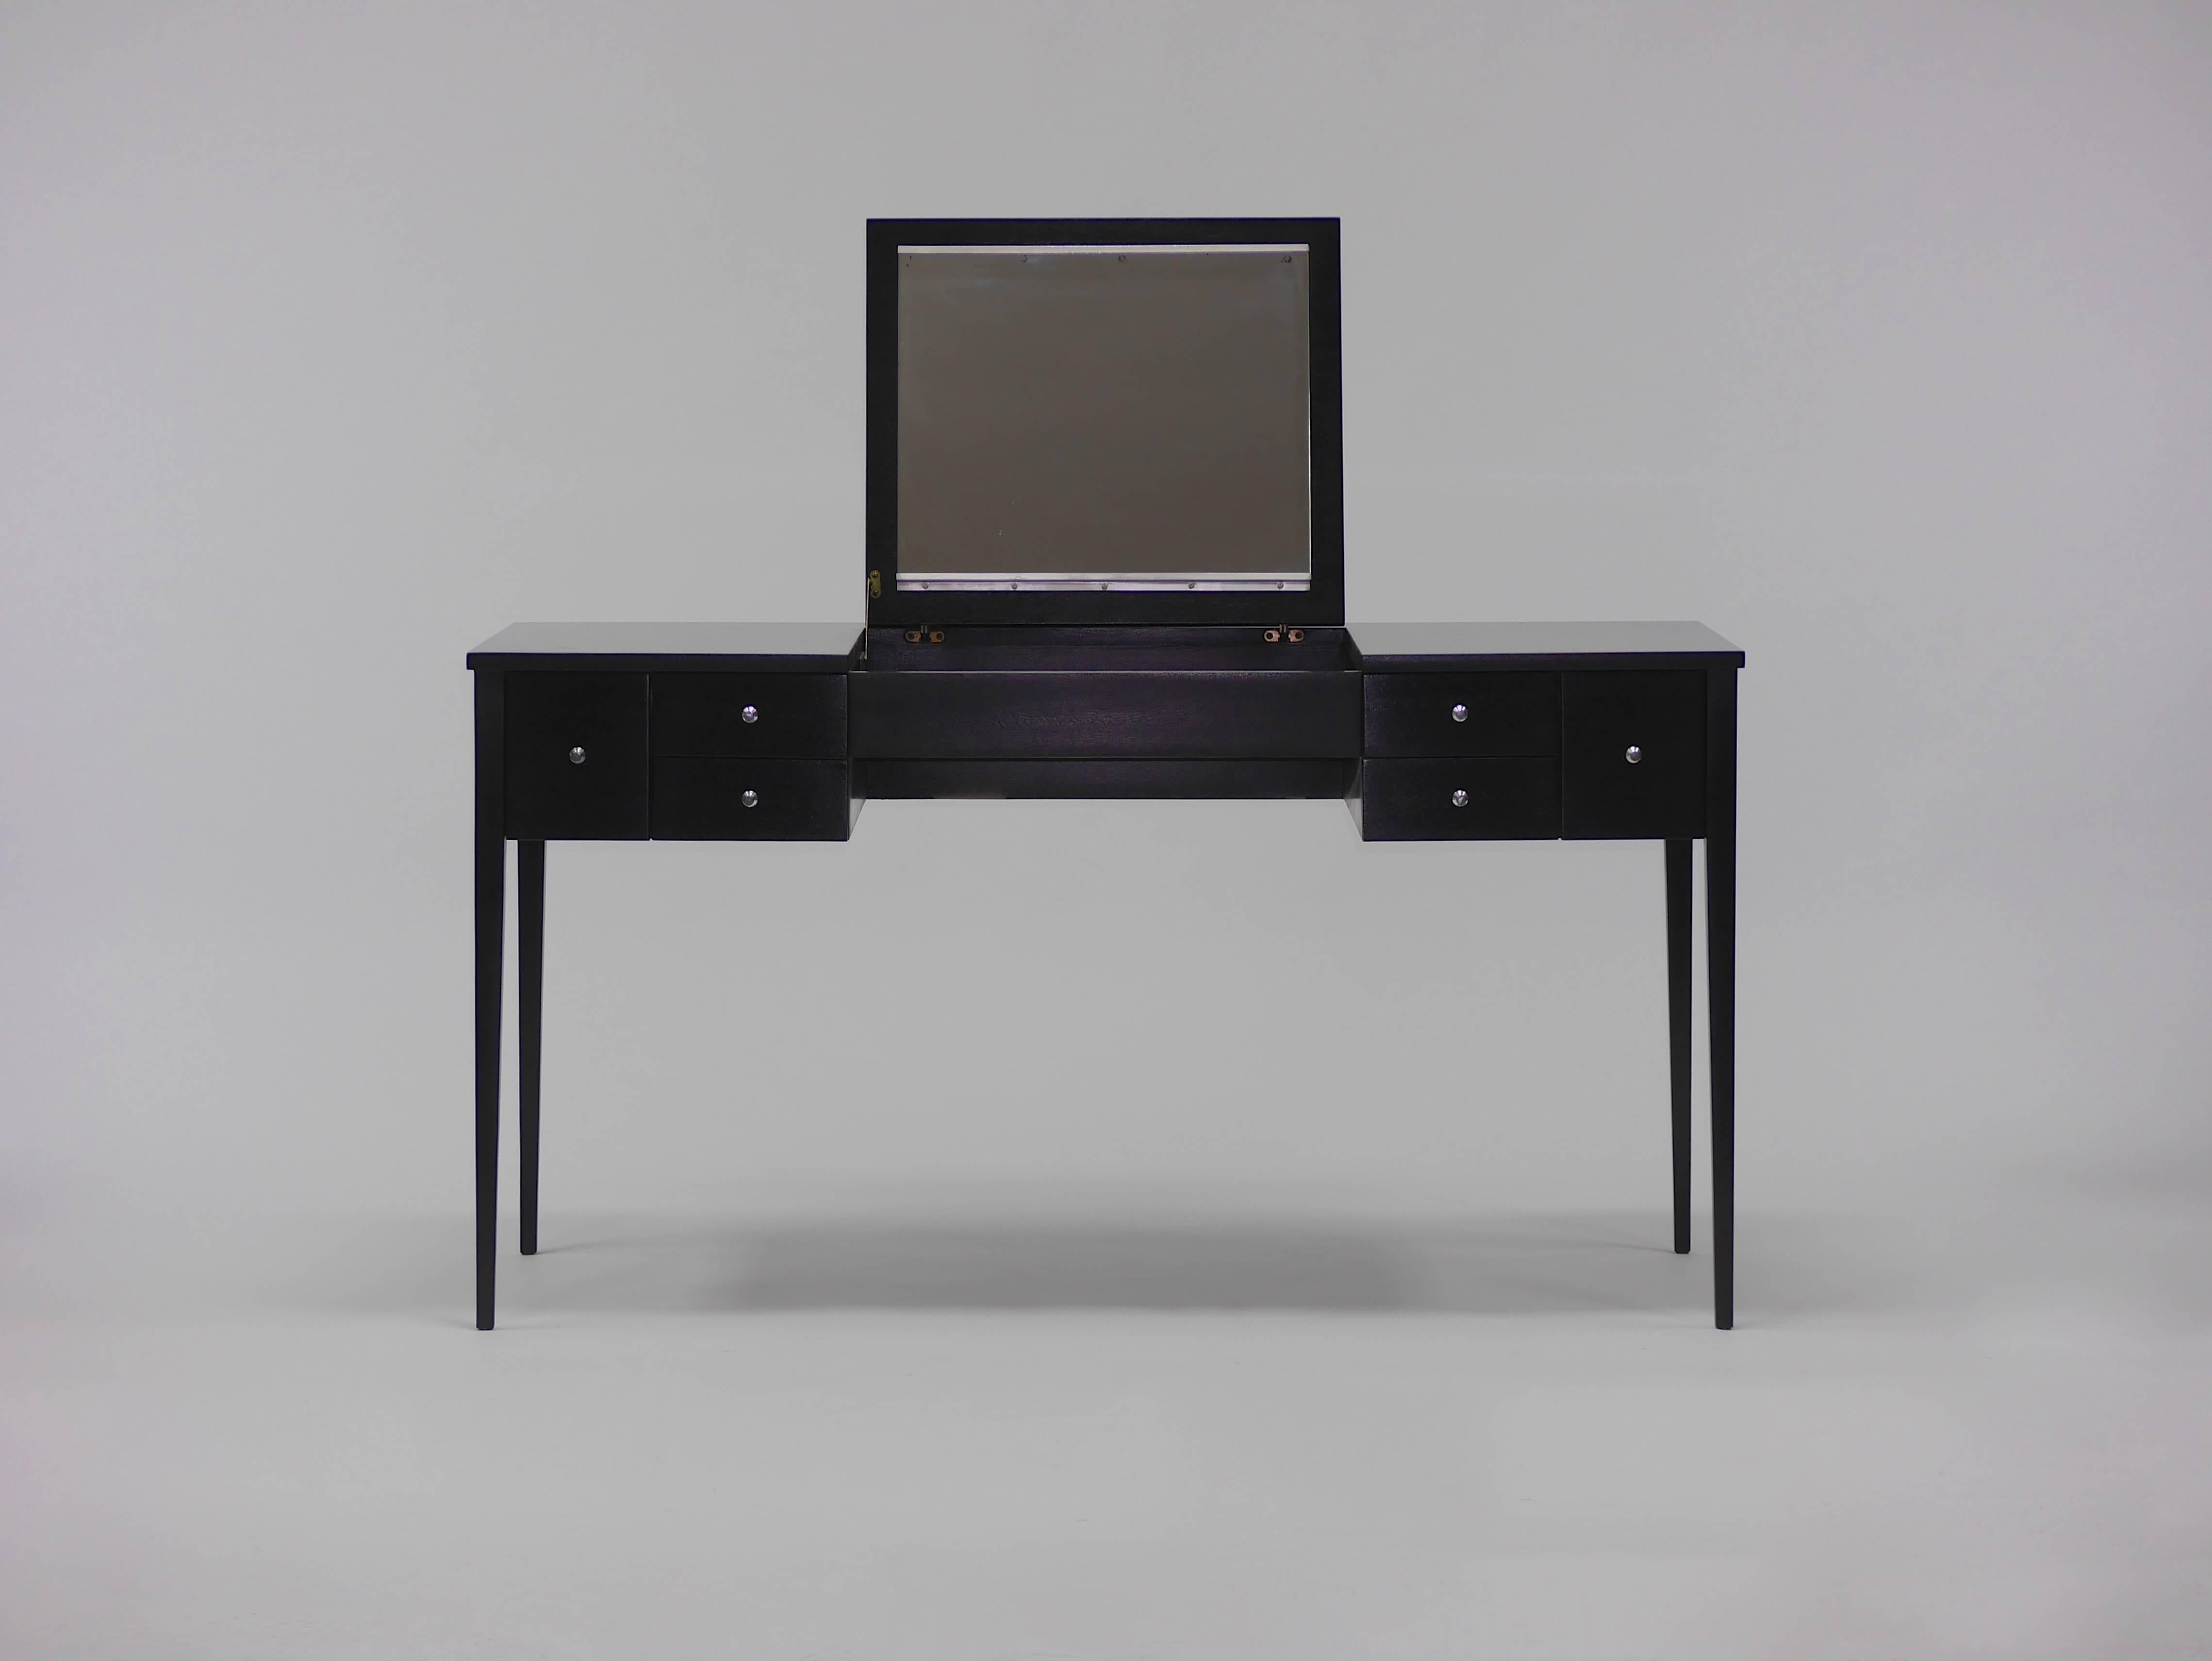 Elegant vanity desk by Paul McCobb for Calvin. Originally designed as a vanity, the flip-top compartment can be used to store laptops and office accessories. Refinished in a dark walnut lacquer. Six drawers with original pulls. Marked Paul McCobb,